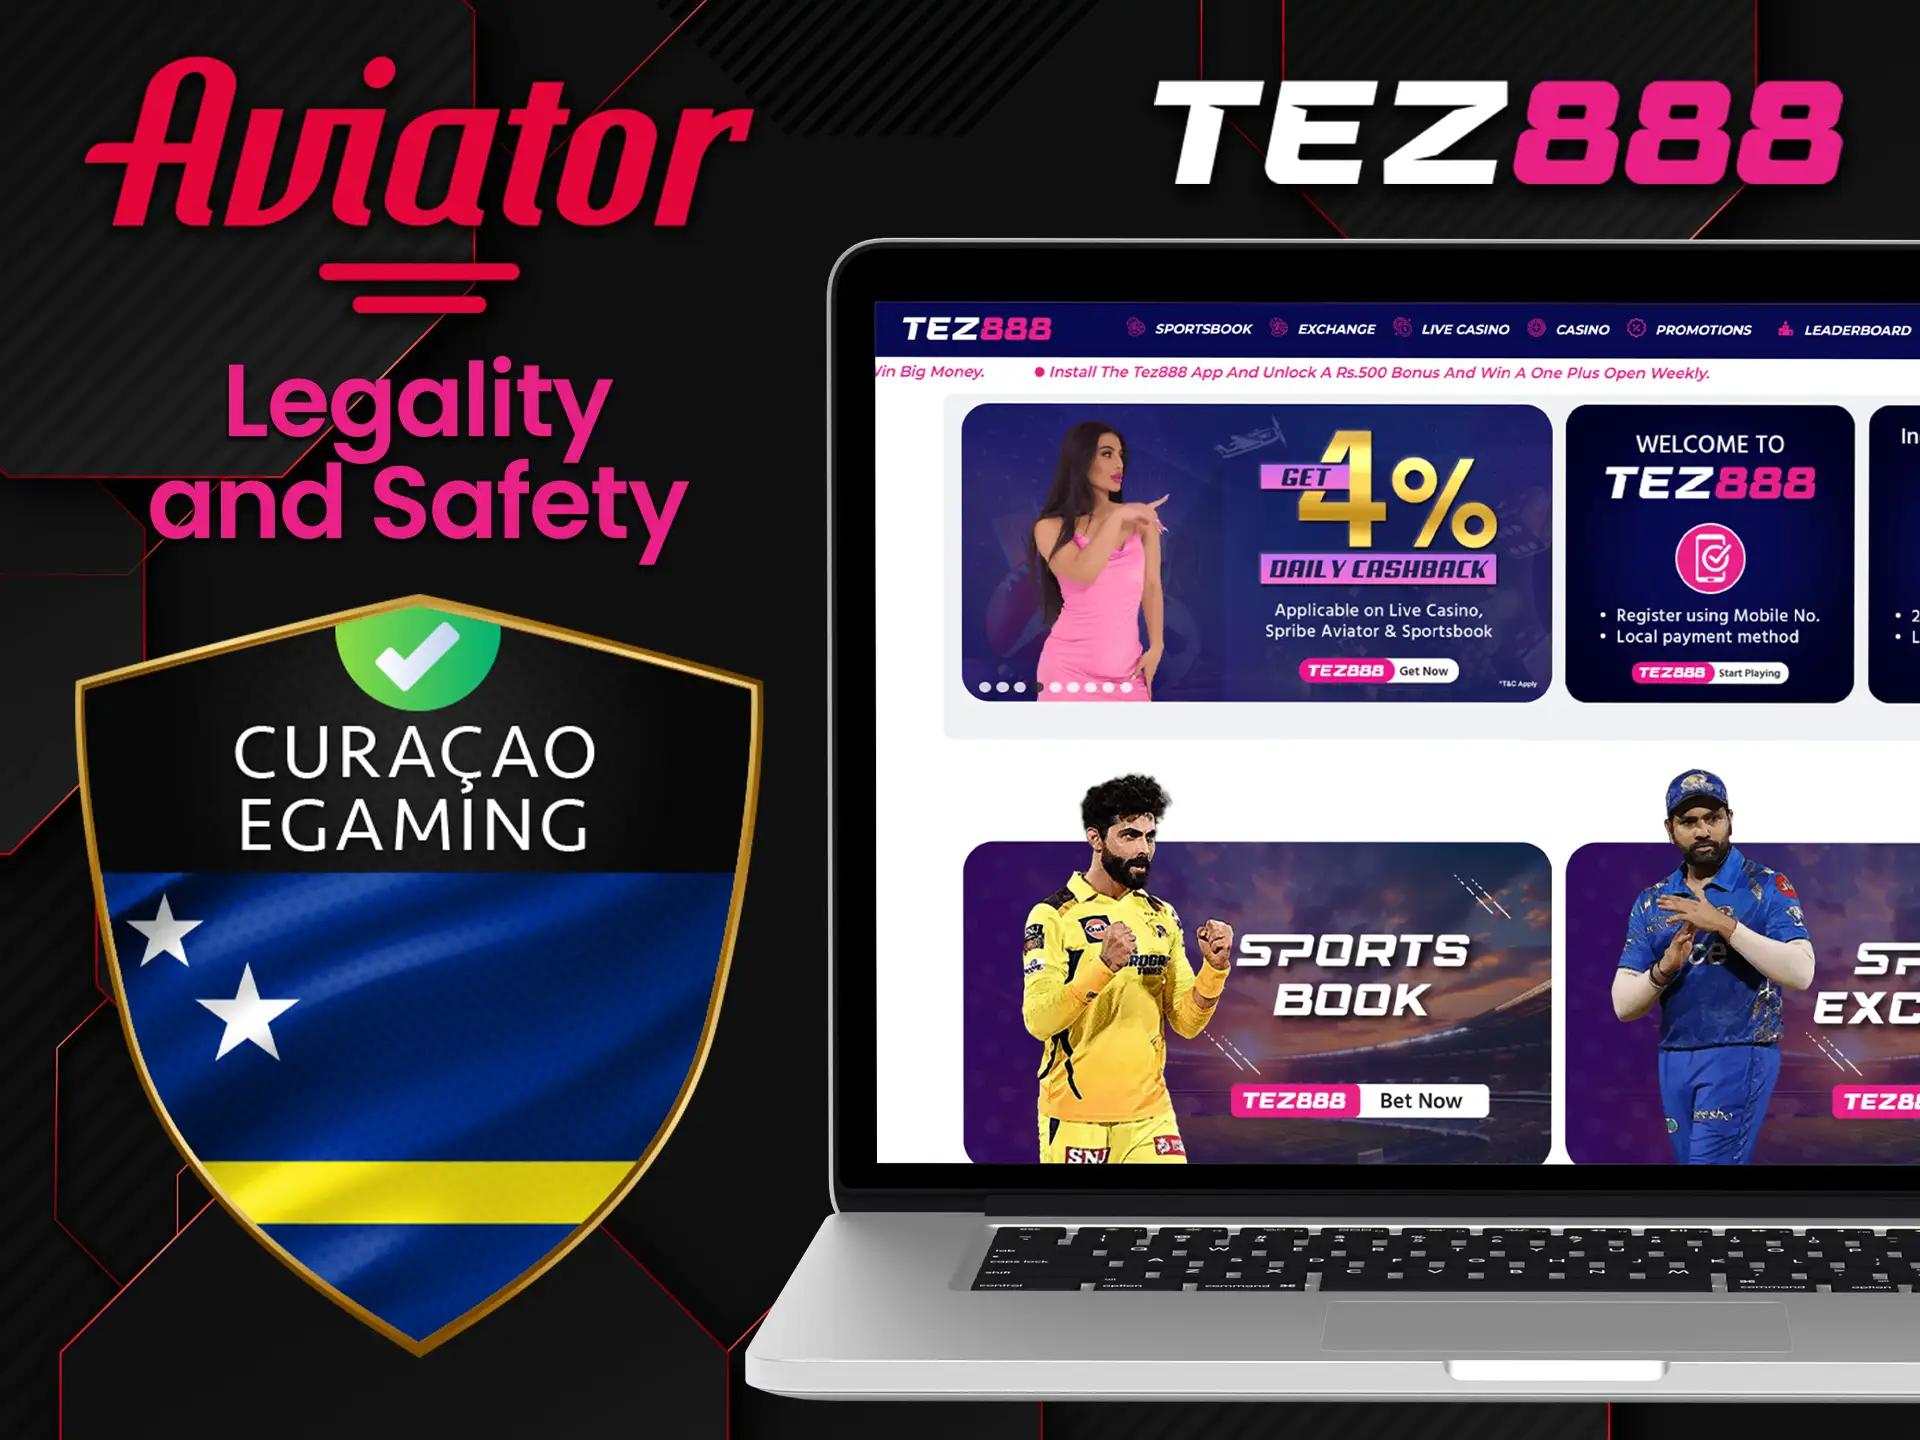 Tez888 provides its services online legally.